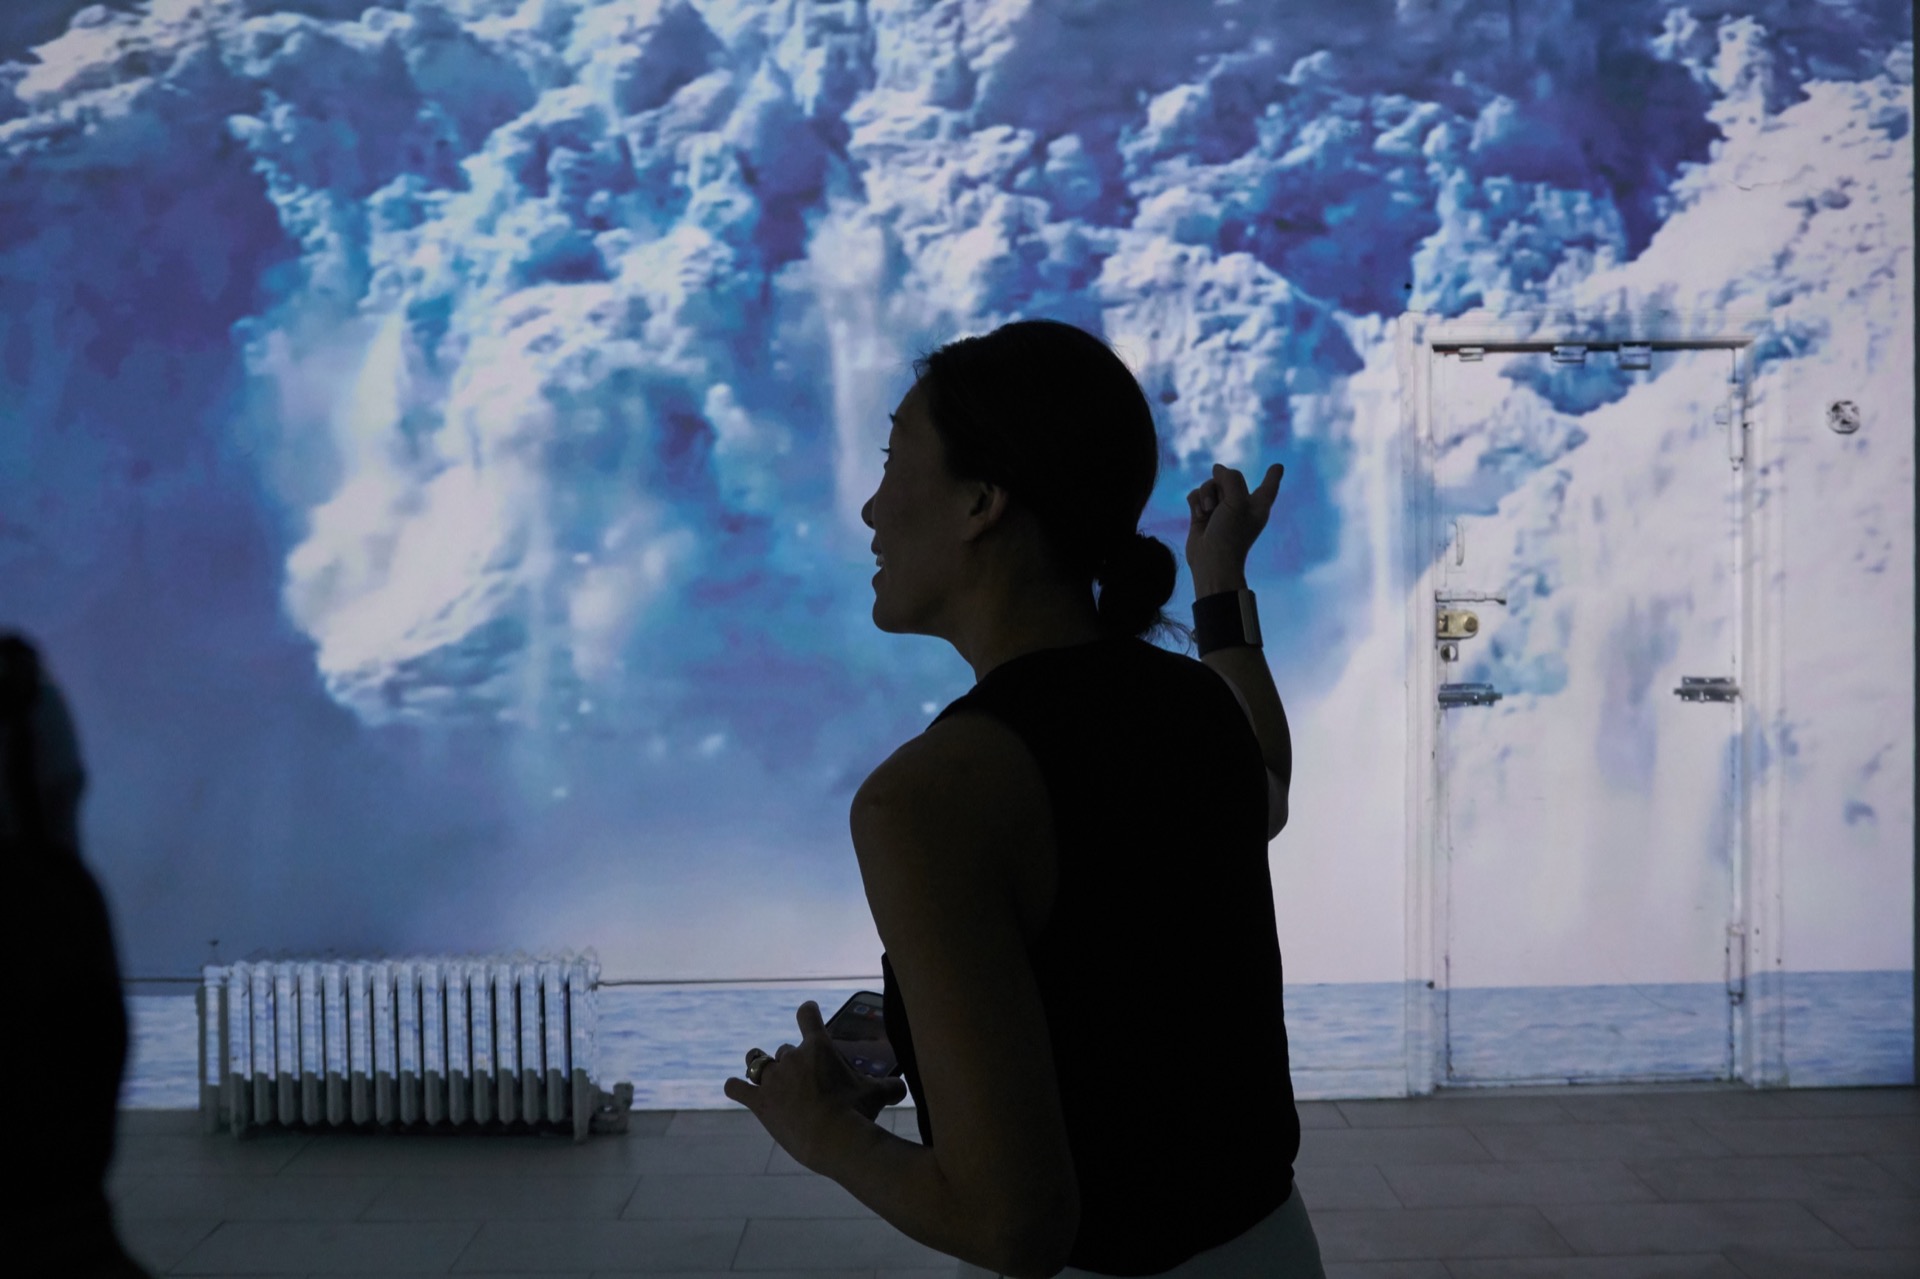 Small thumbnail image of Close-up photograph of a person's head, in 3/4 profile in the middle of the frame. She is pointing to the wall behind her, onto which is projected an image of a glacier collapsing. She appears to be saying something.